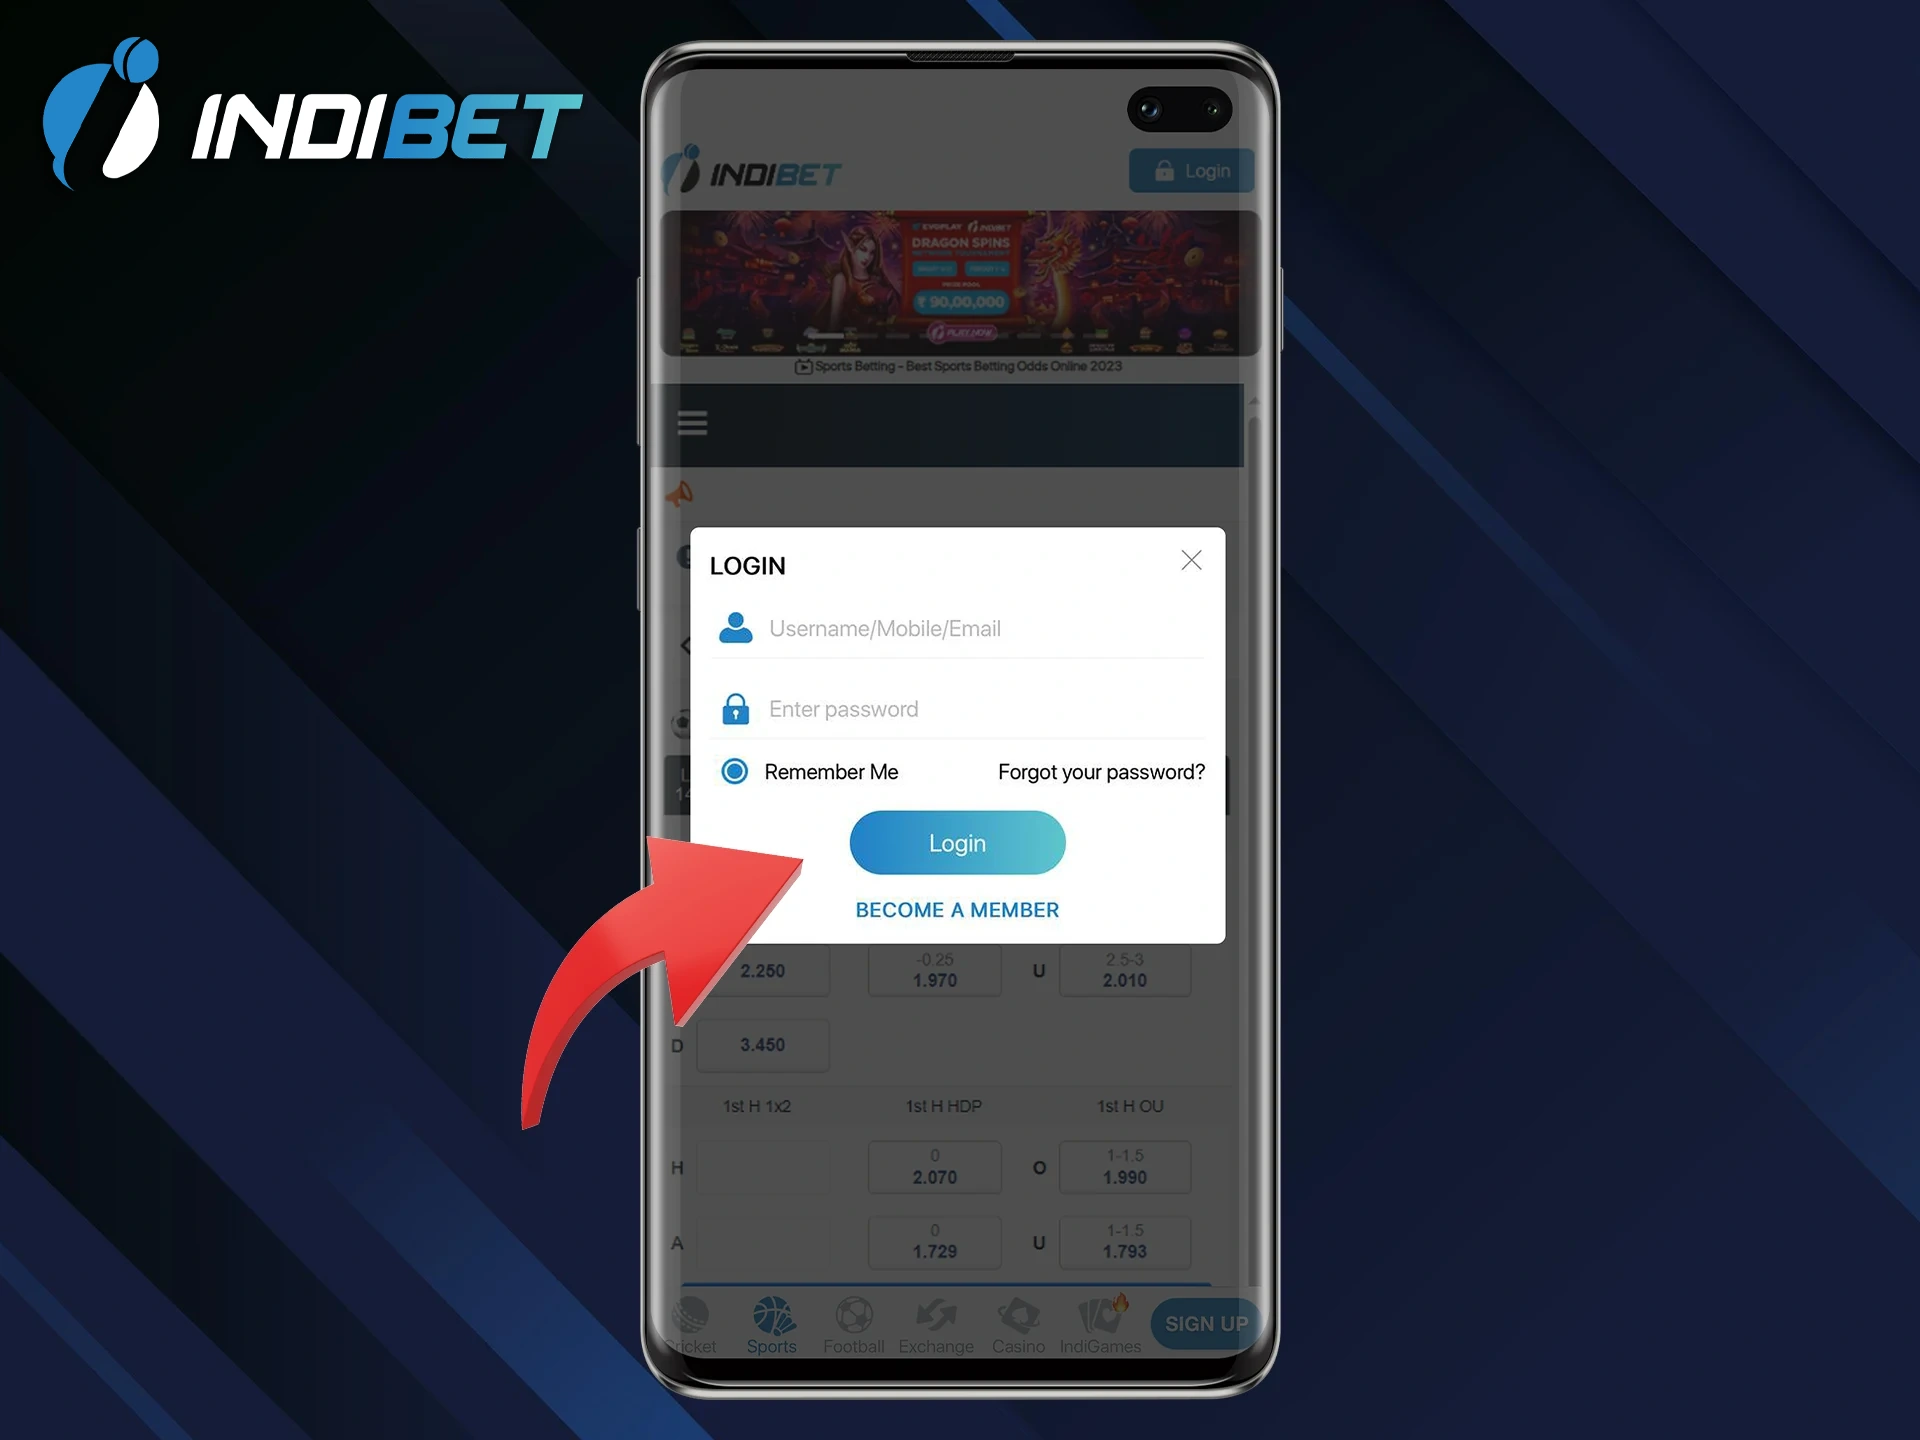 Open the Indibet app and log in to your account.